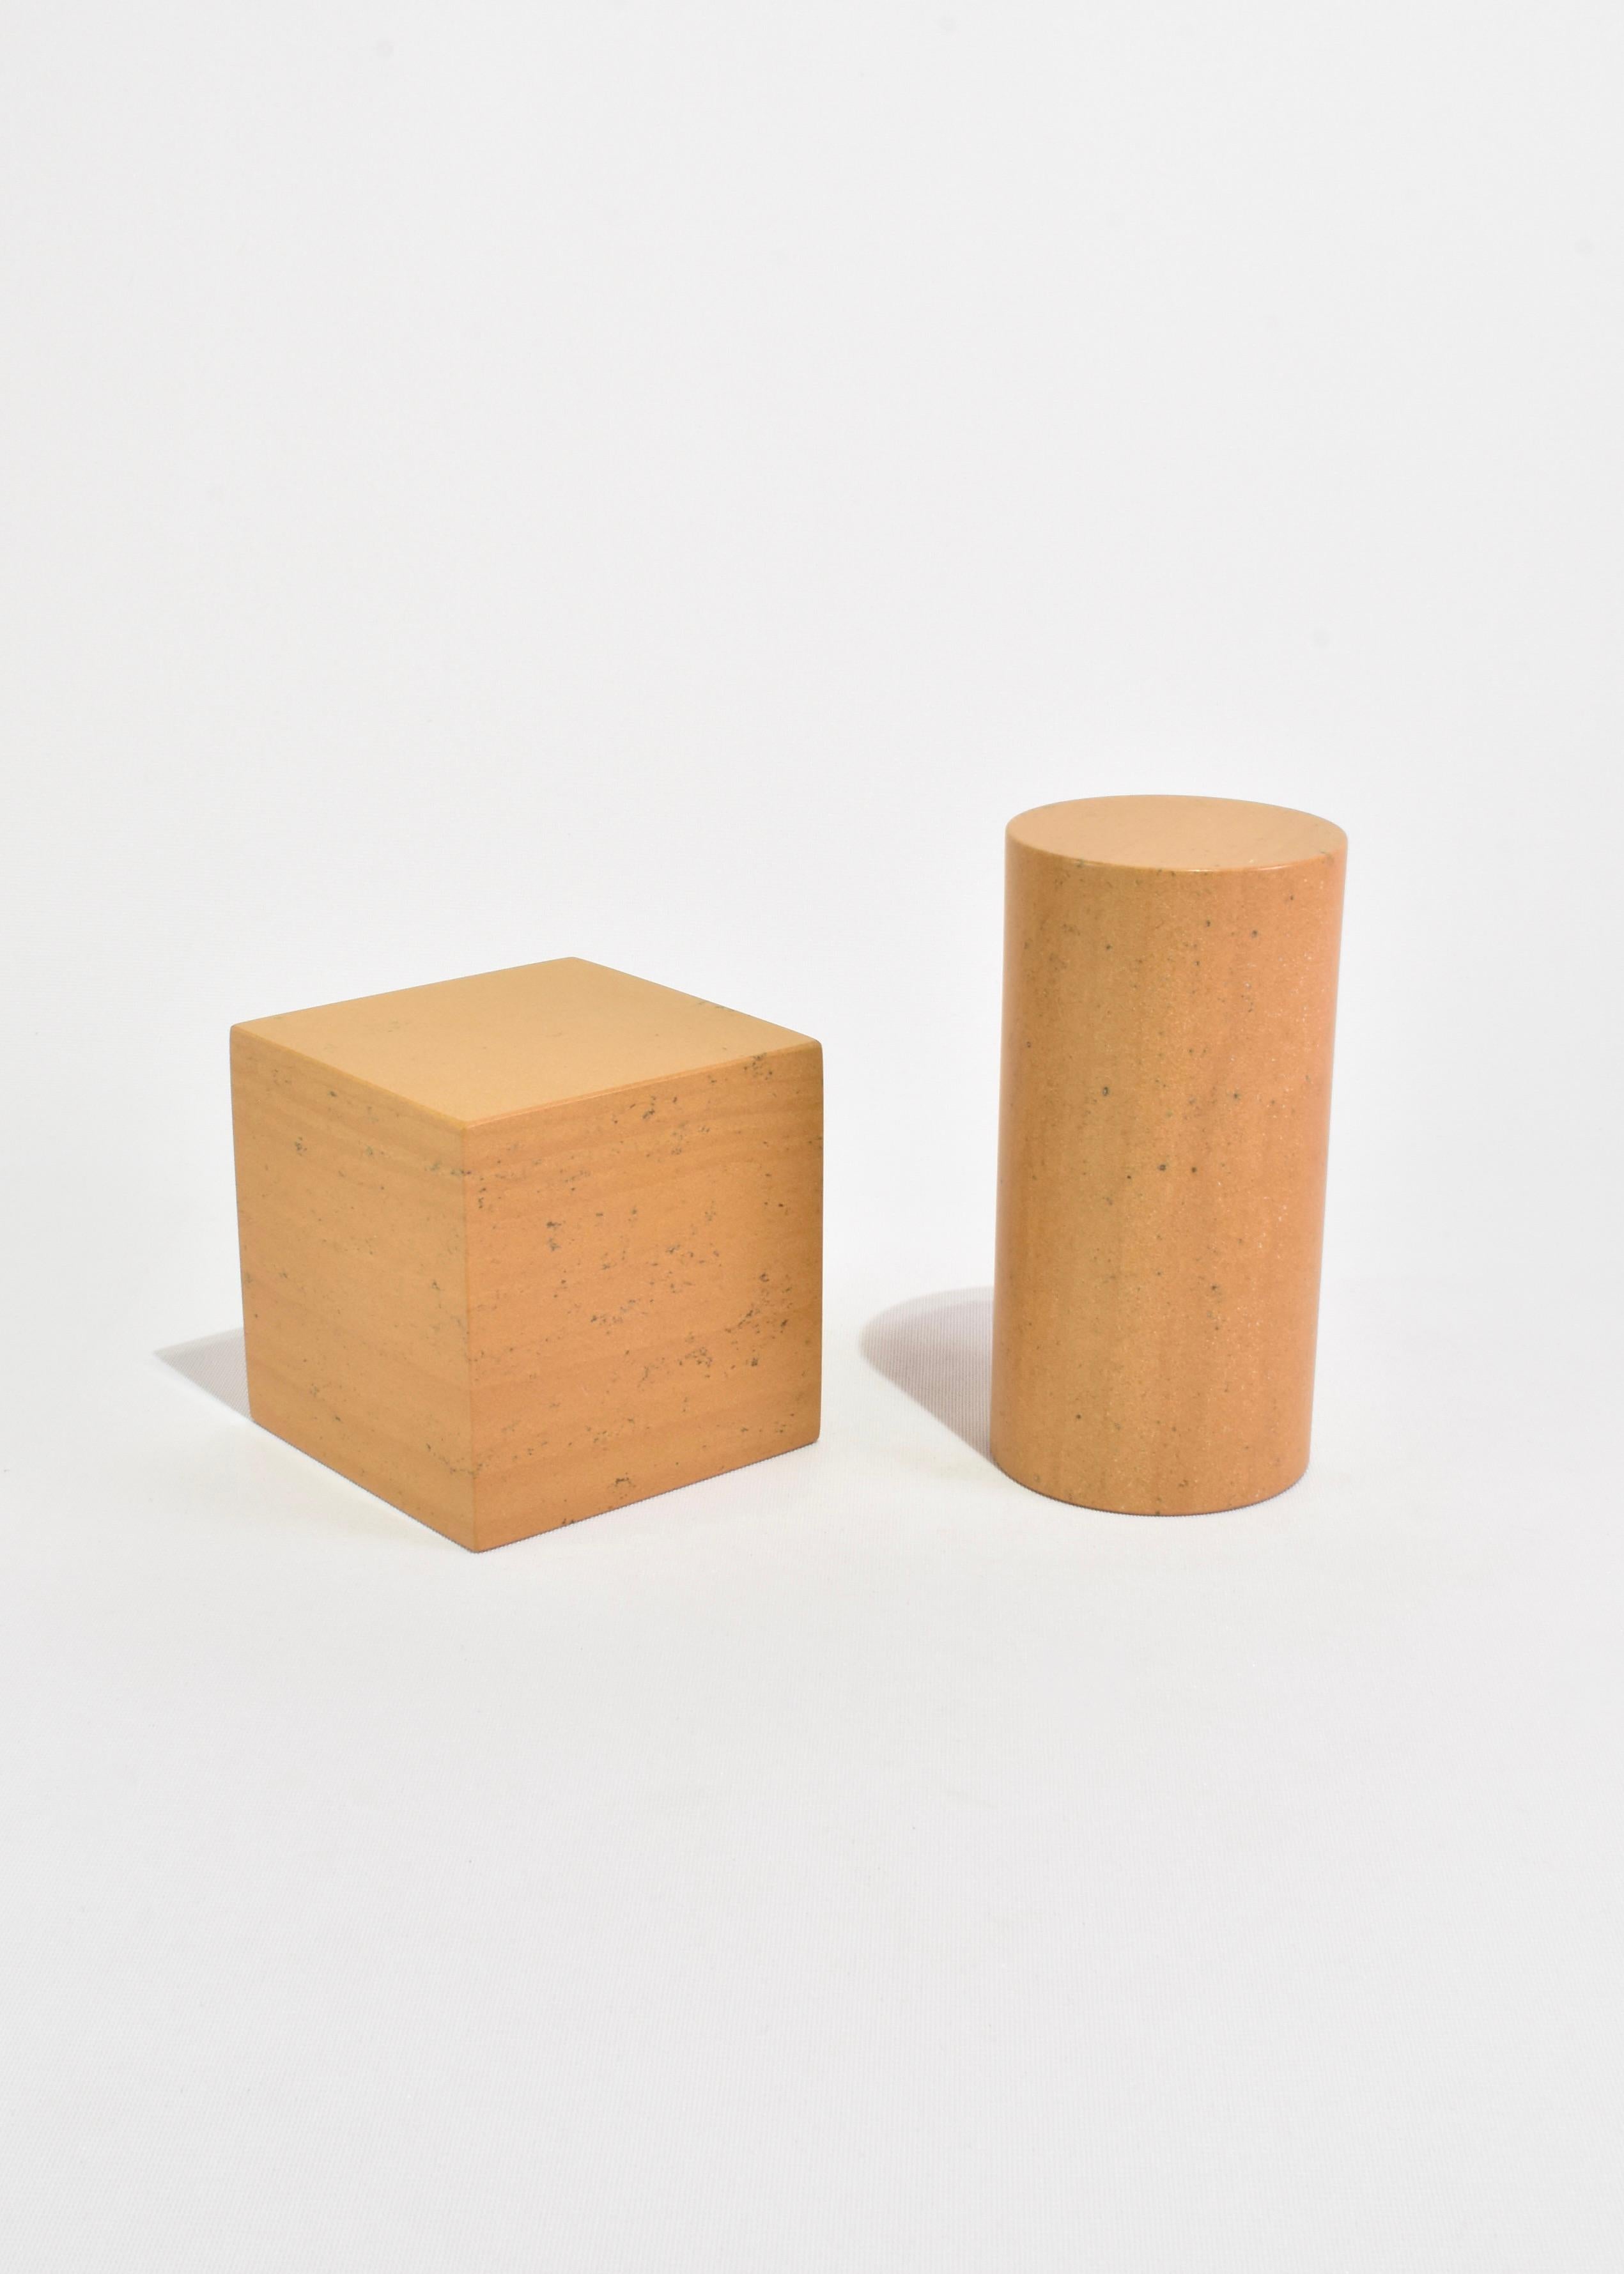 Hand-Crafted Sandstone Cube Bookend